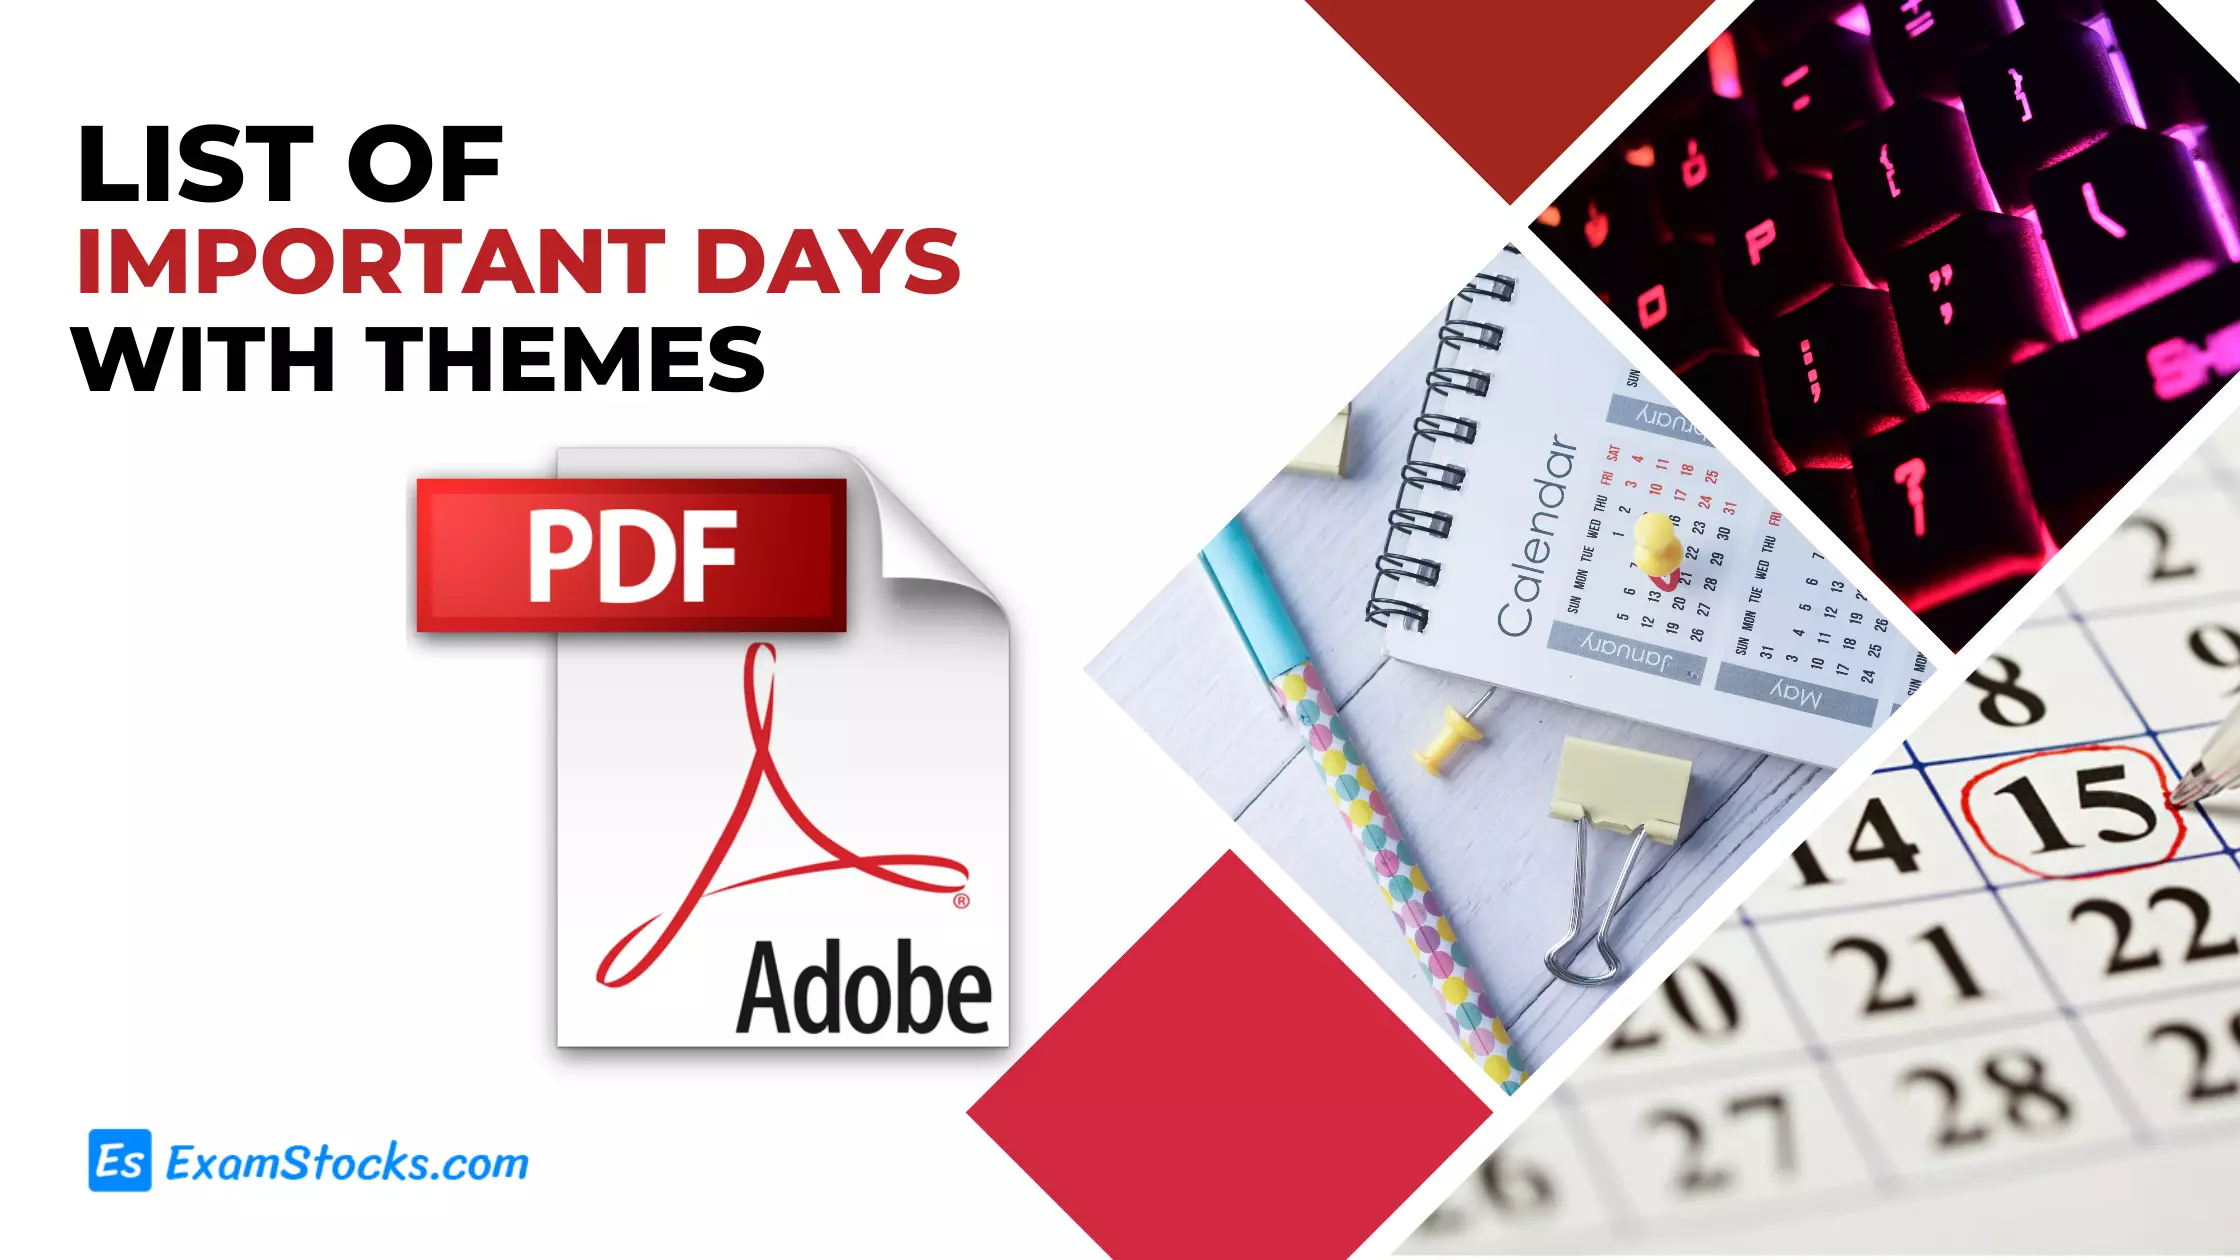 List Of Important Days With Themes PDF